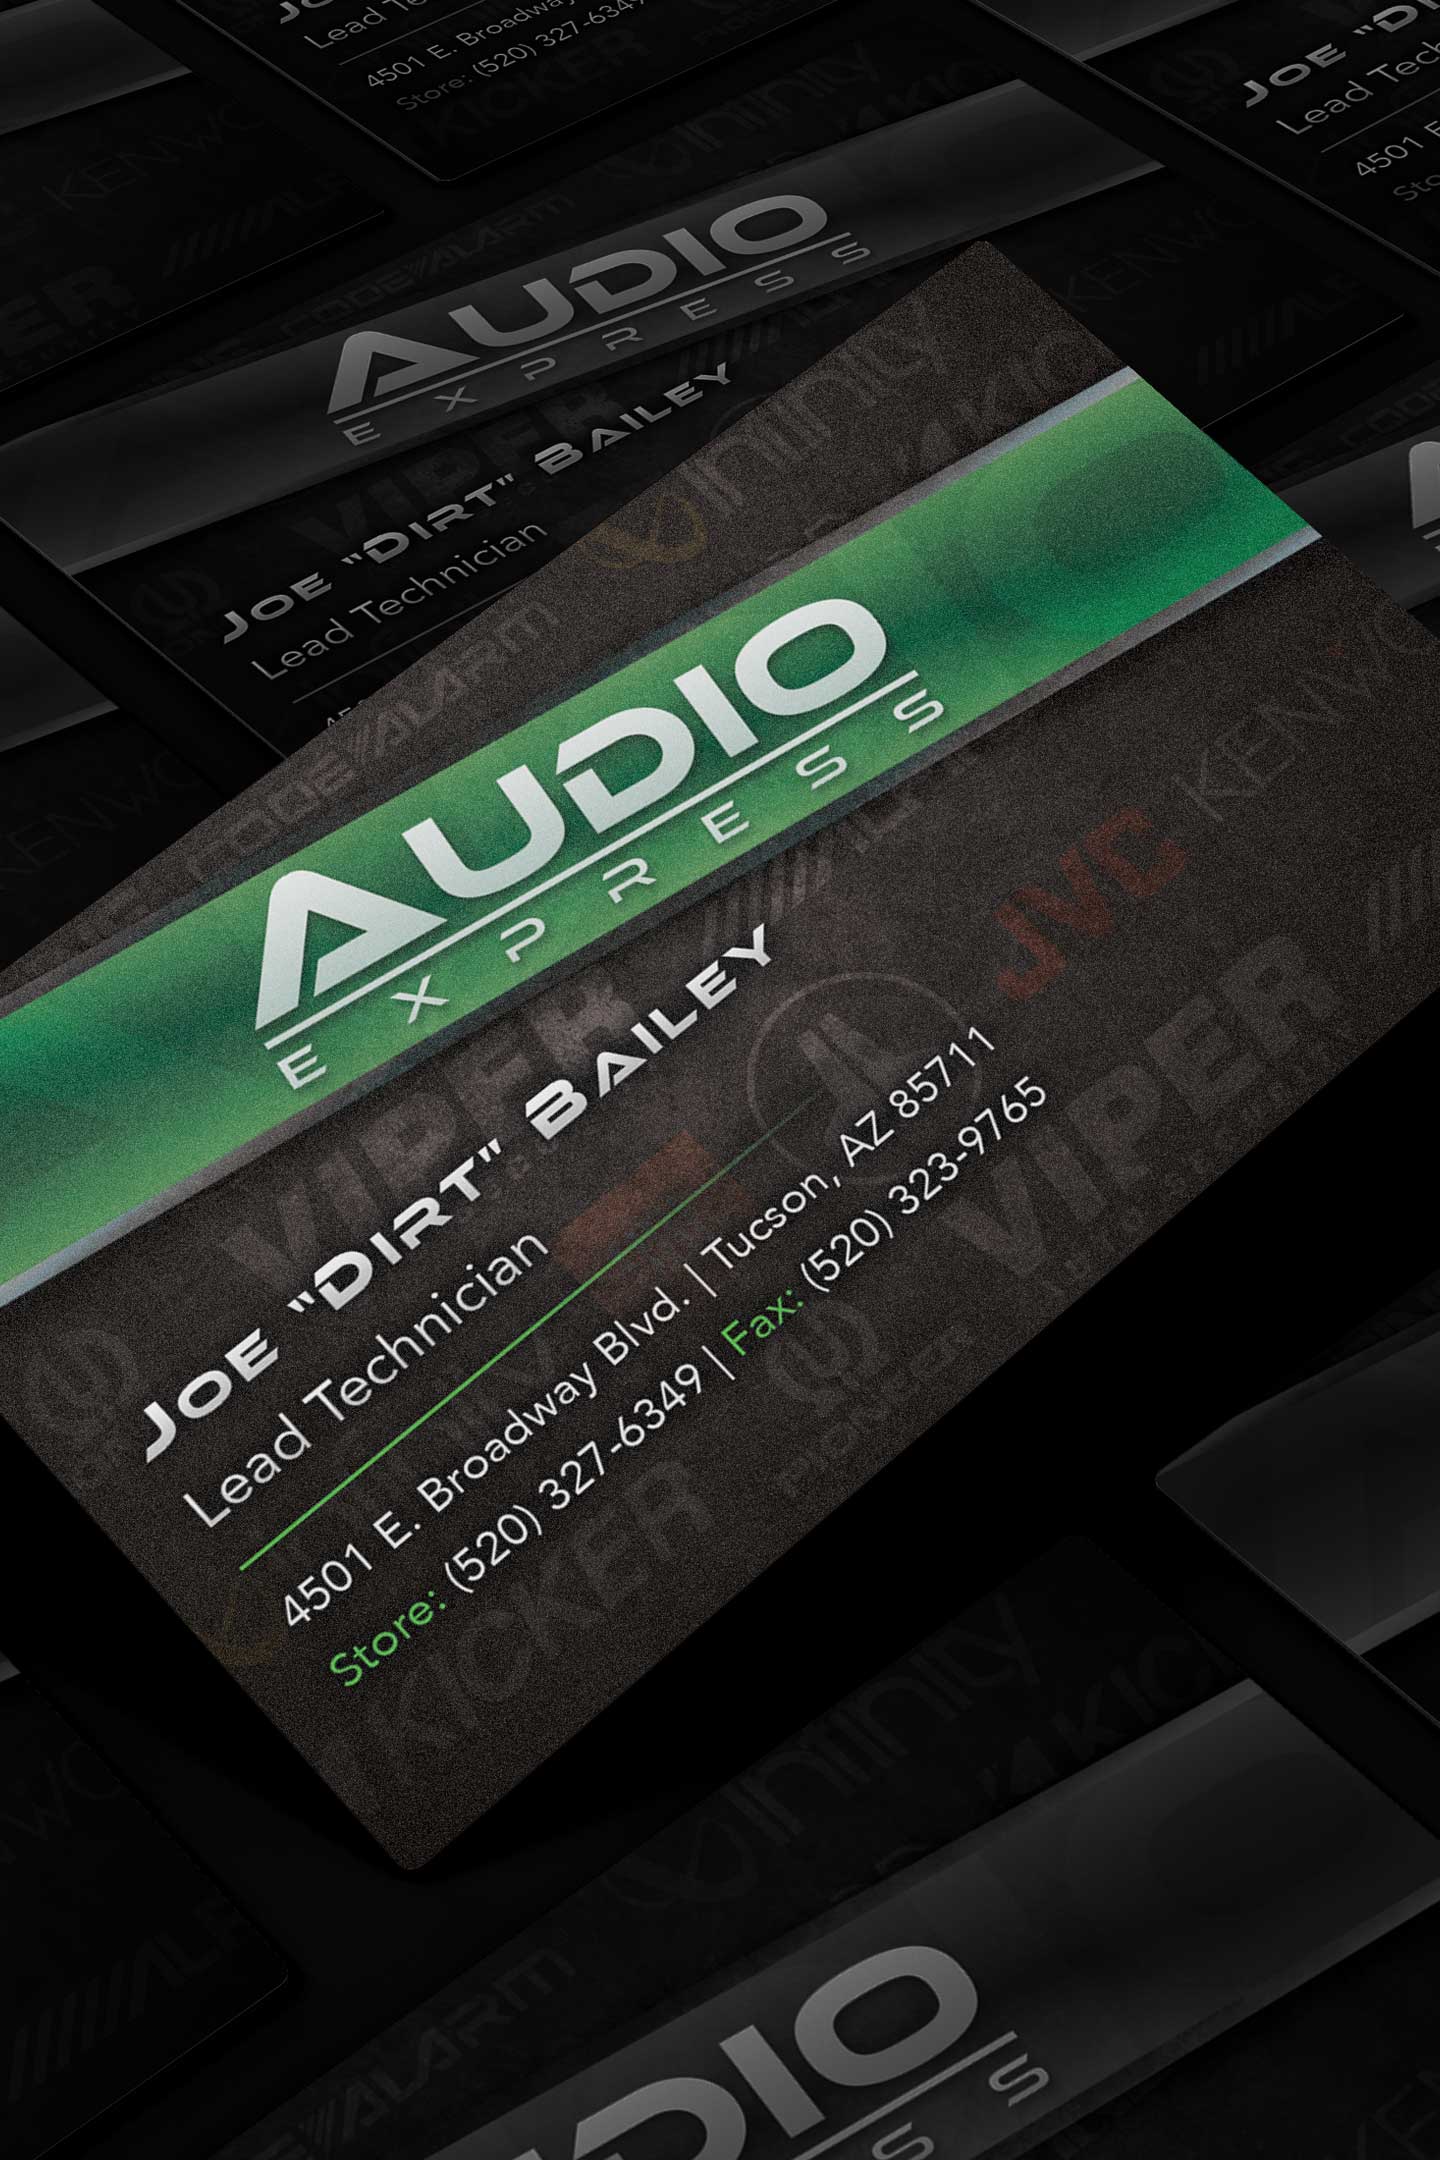 Audio Express - Business Cards